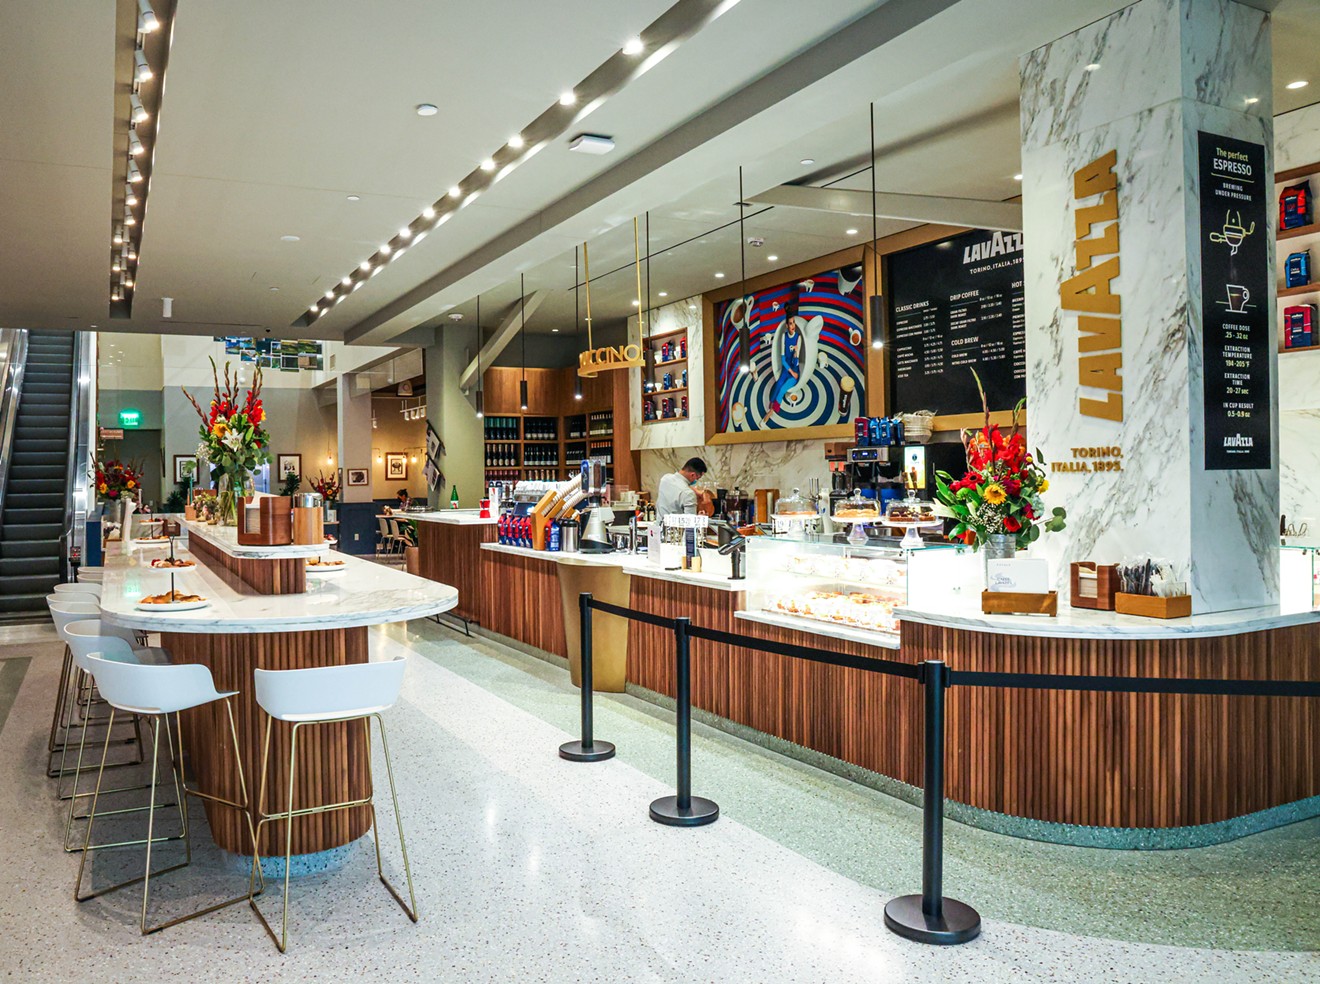 Eataly now has an all-day cafe, Caffe Lavazza, that offers coffee in the morning and wine cocktails in the evening.